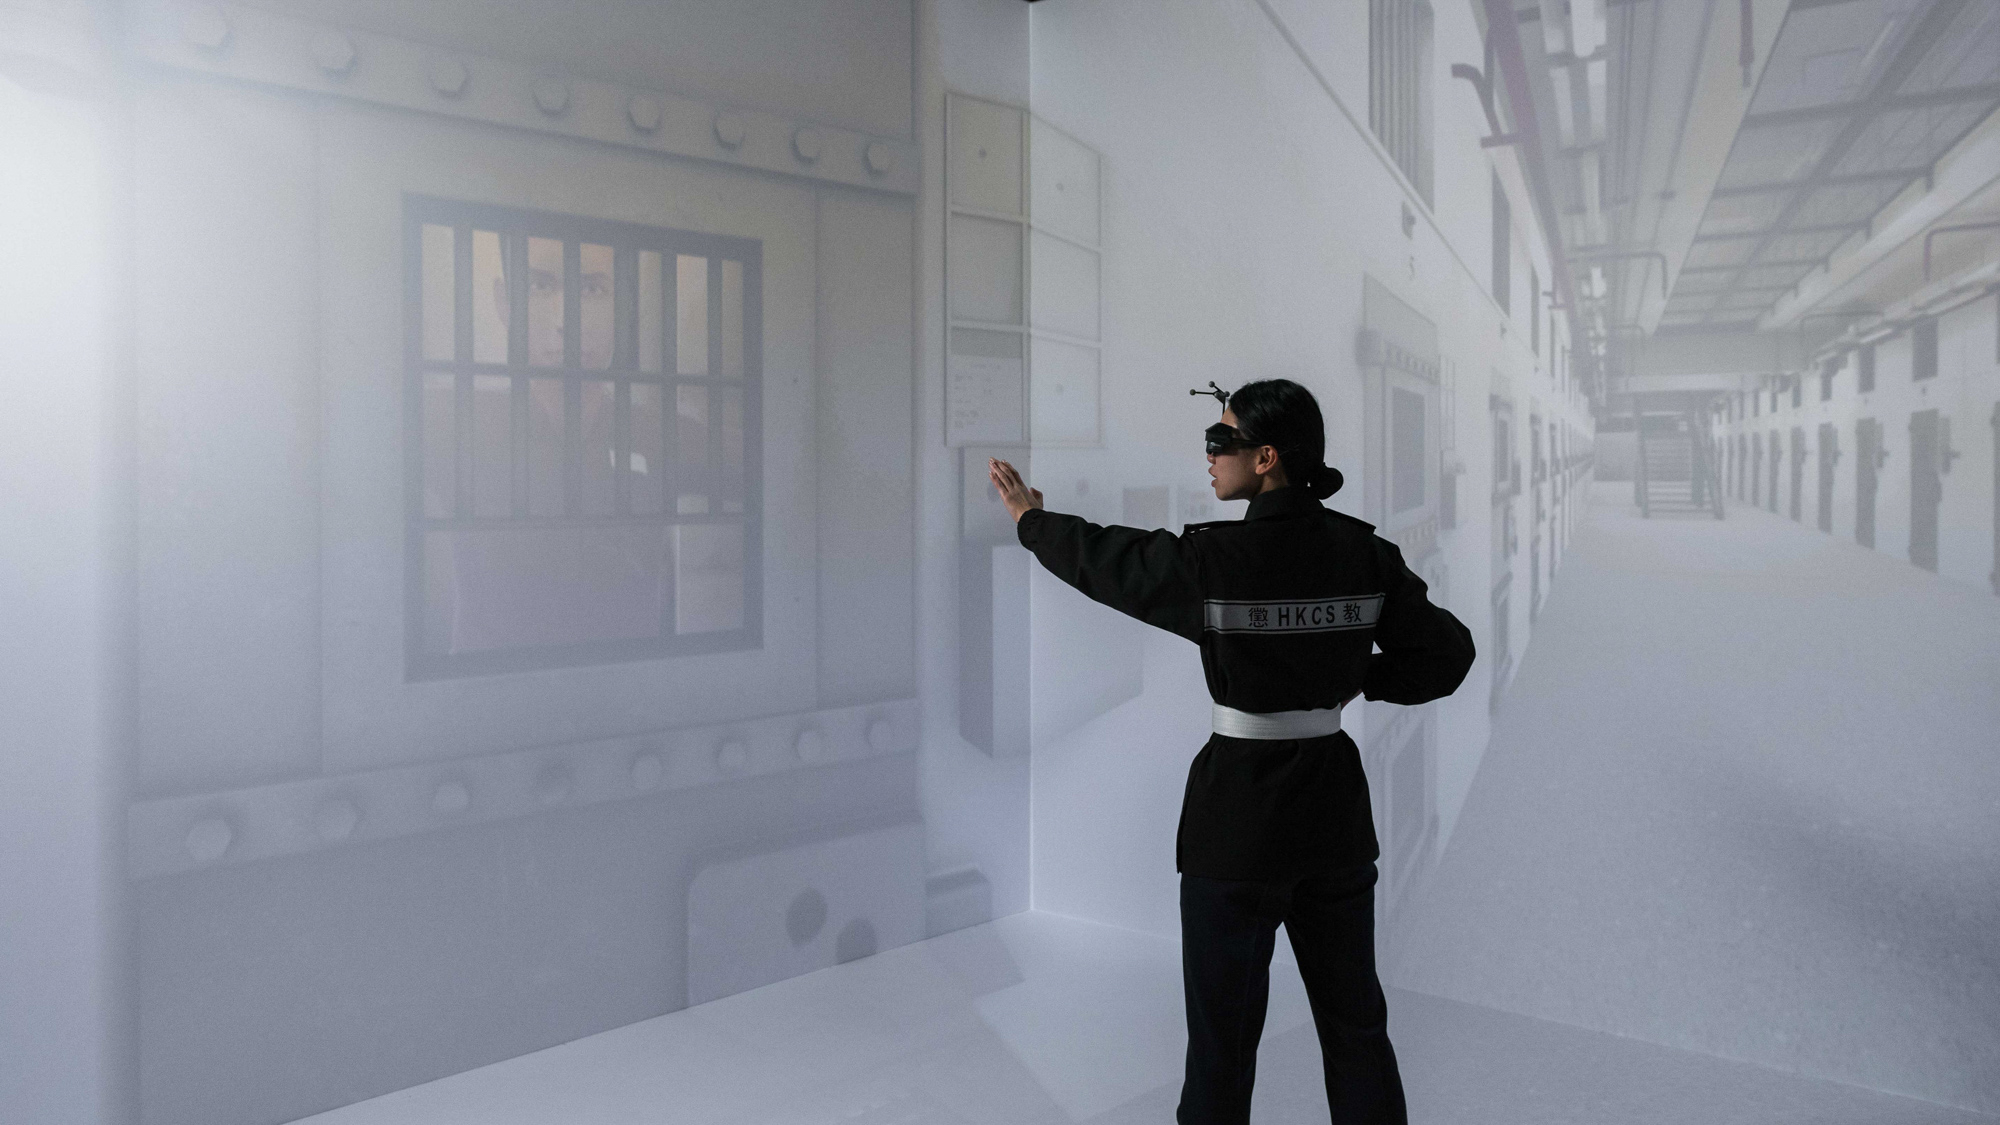 The Department applies virtual reality system for scenario training.